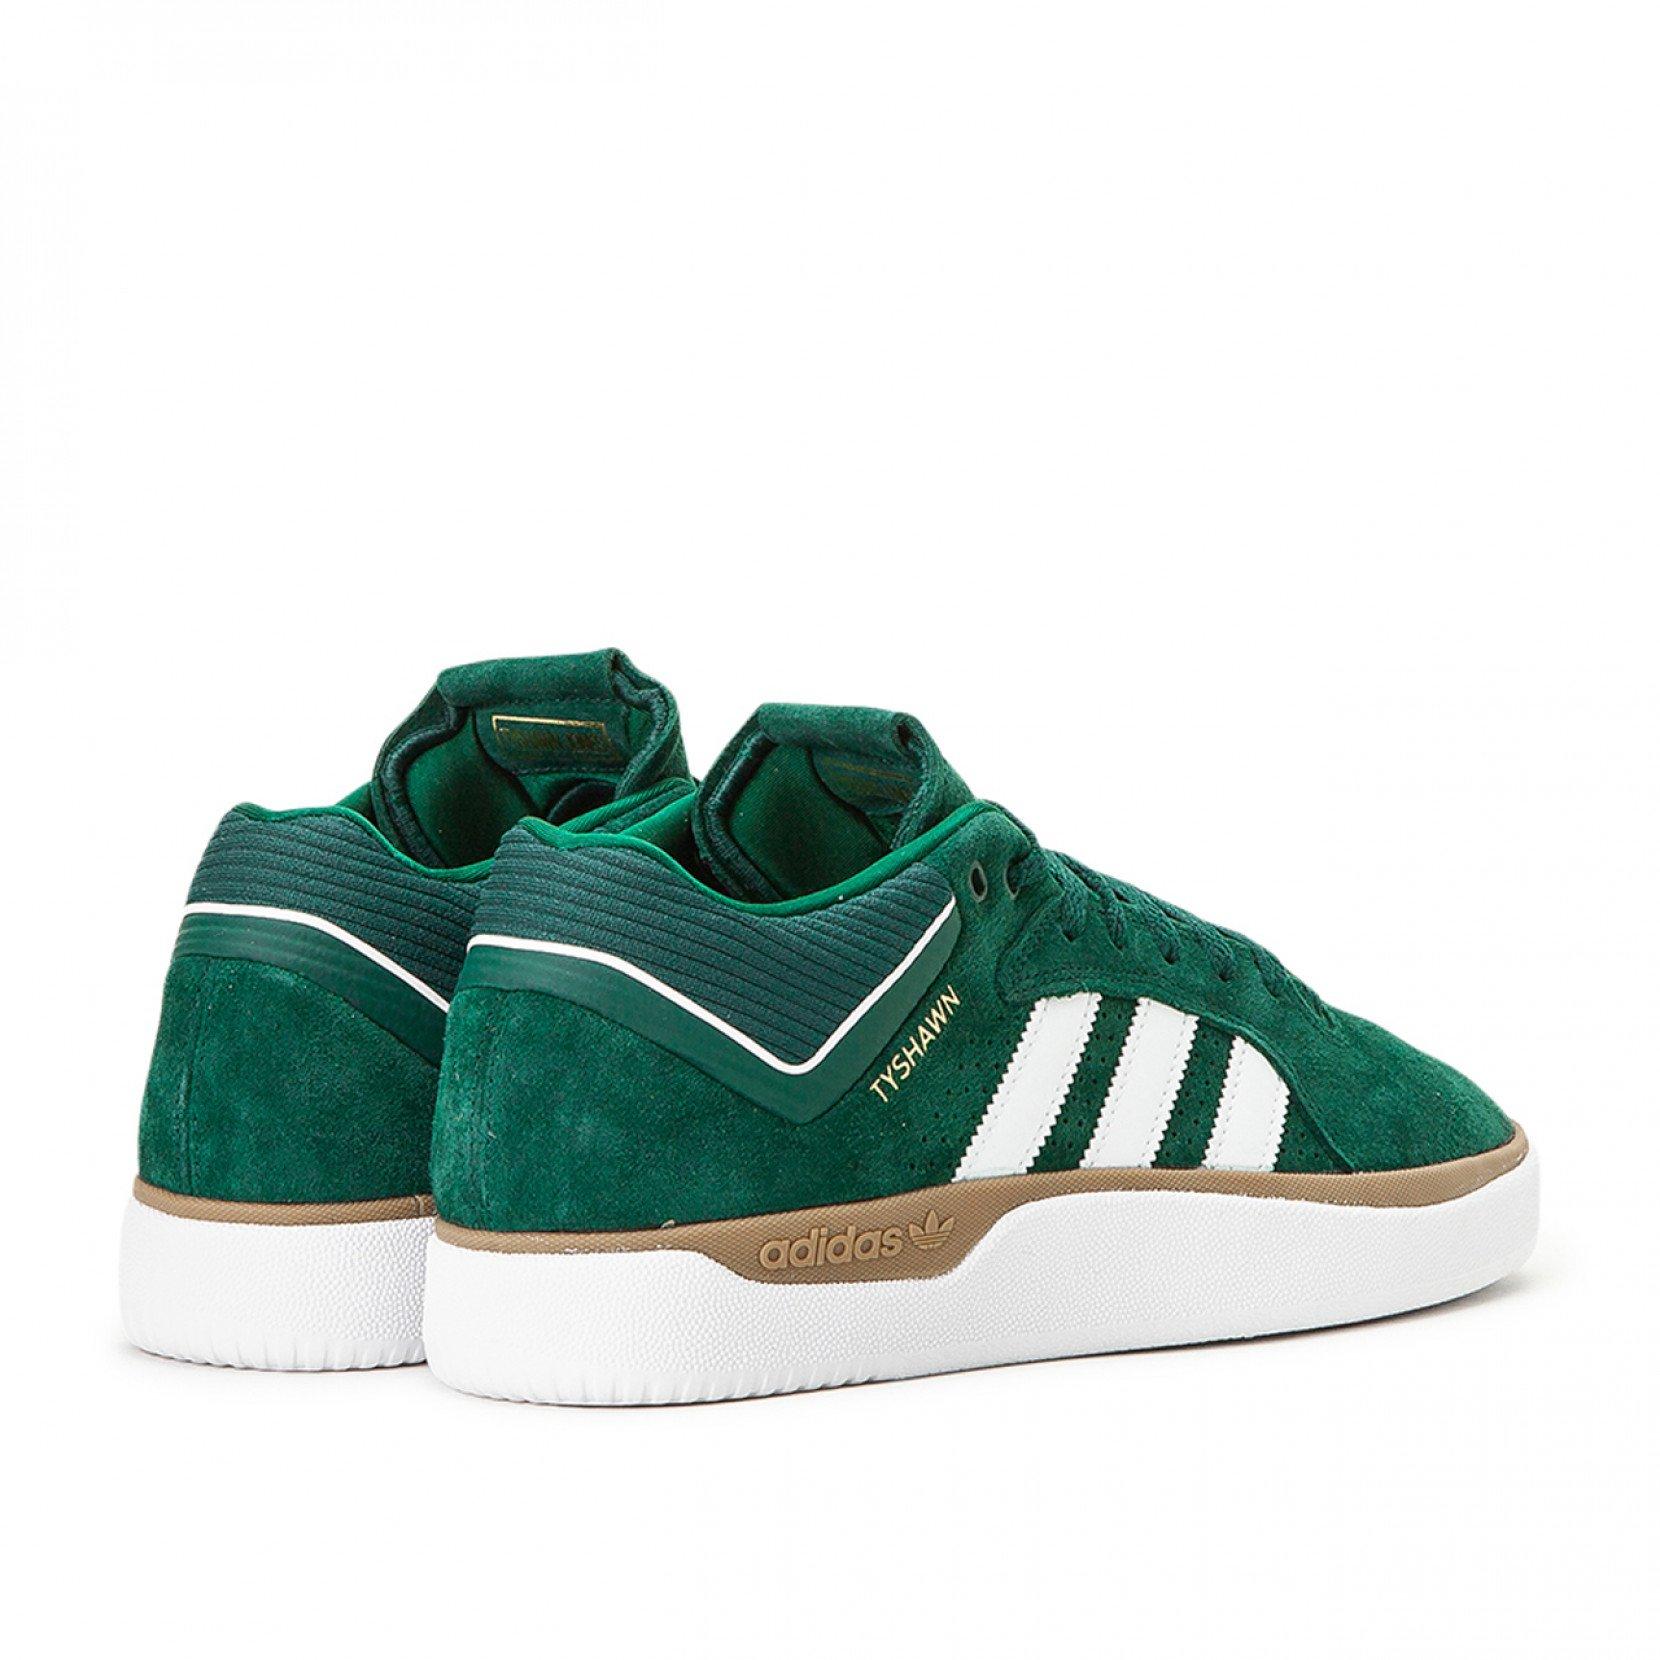 adidas Tyshawn Shoes in Green for Men - Lyst